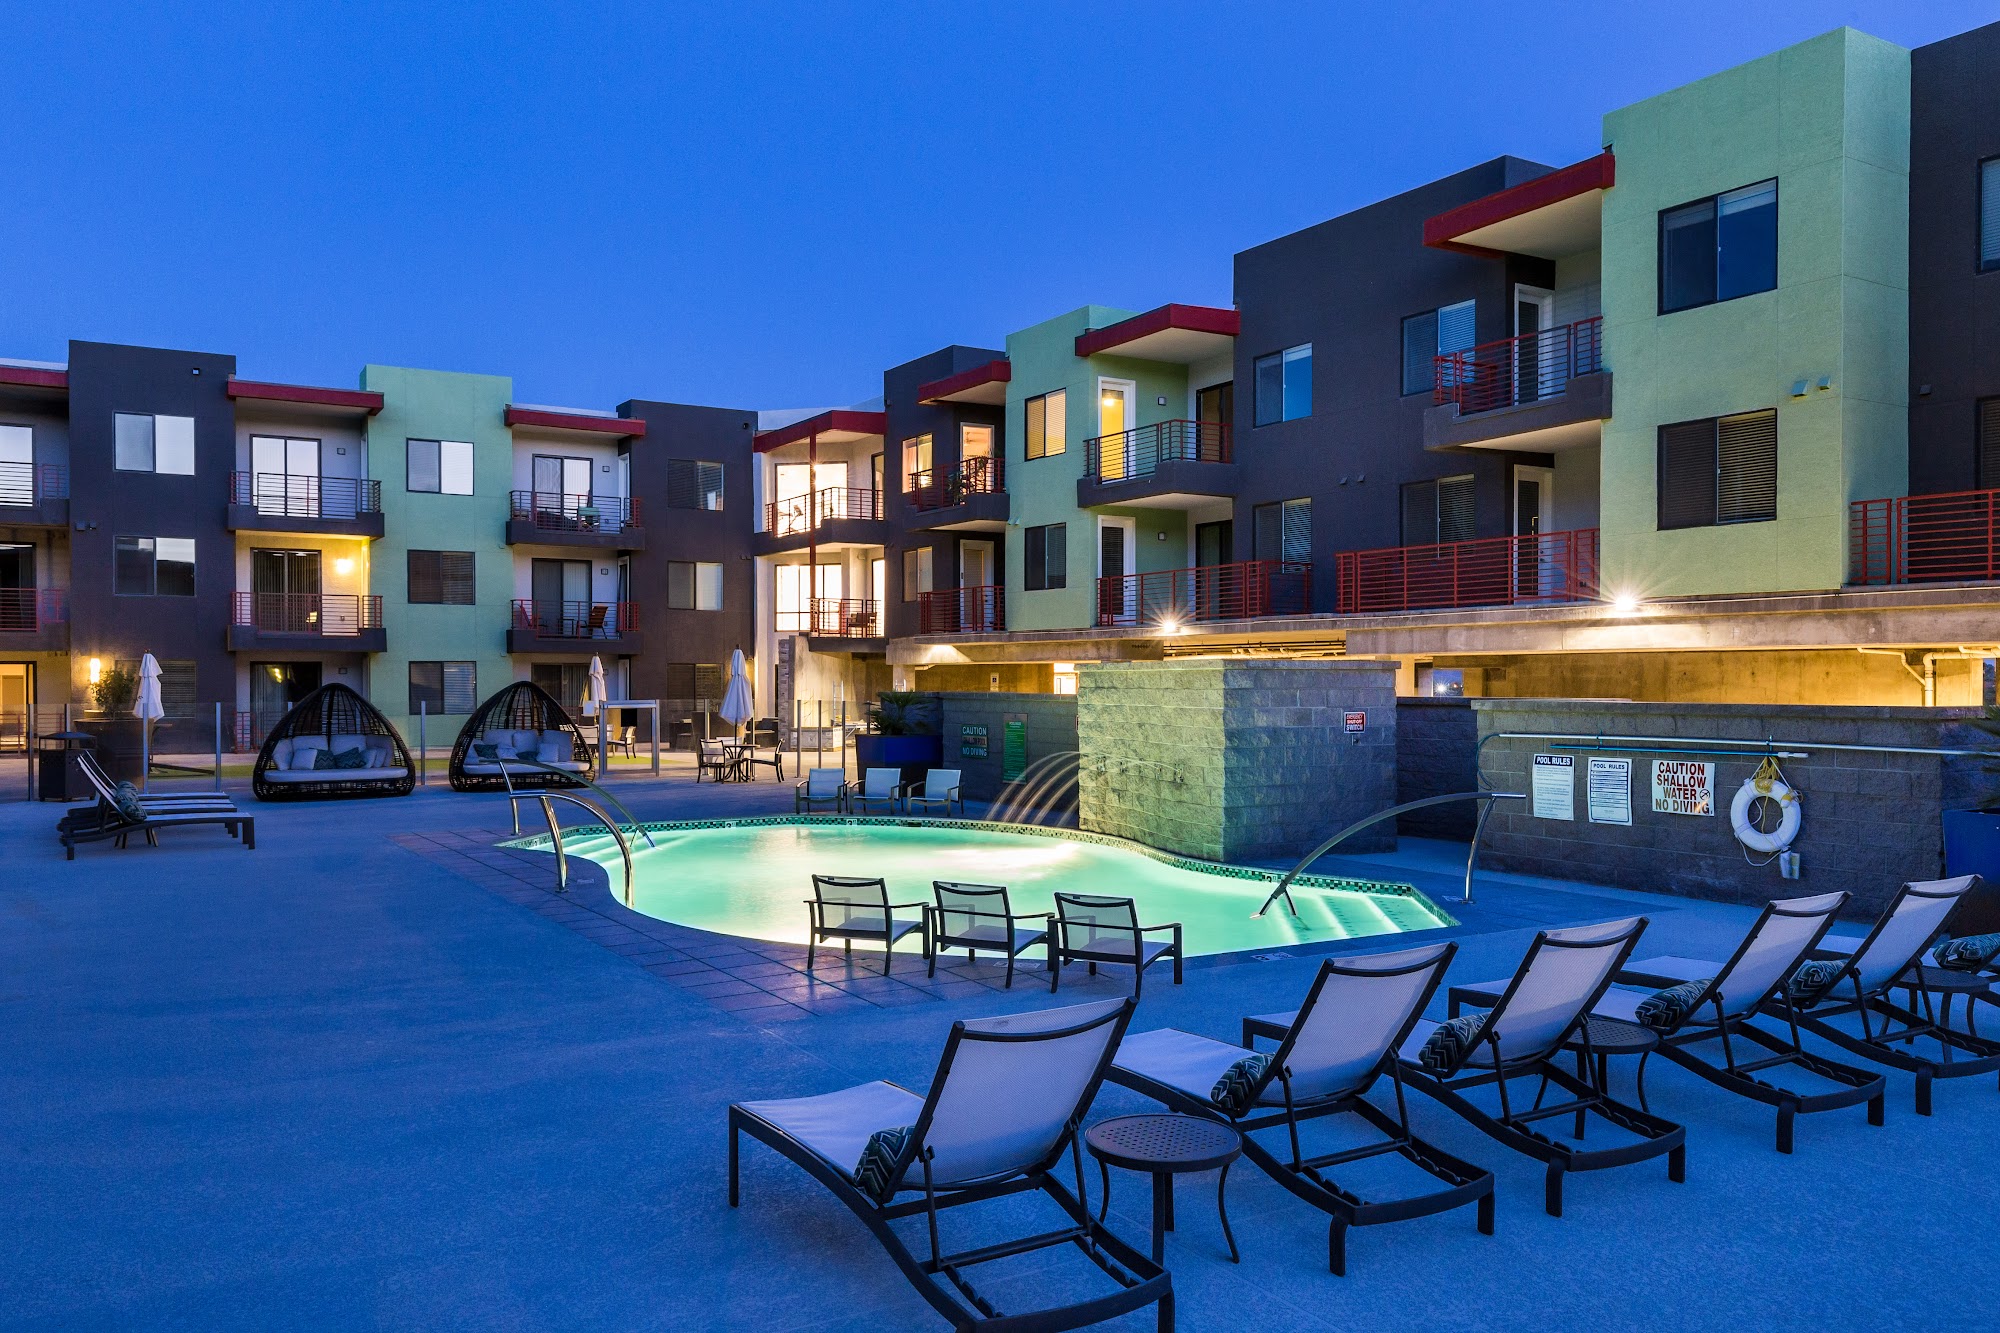 Park Place at Fountain Hills